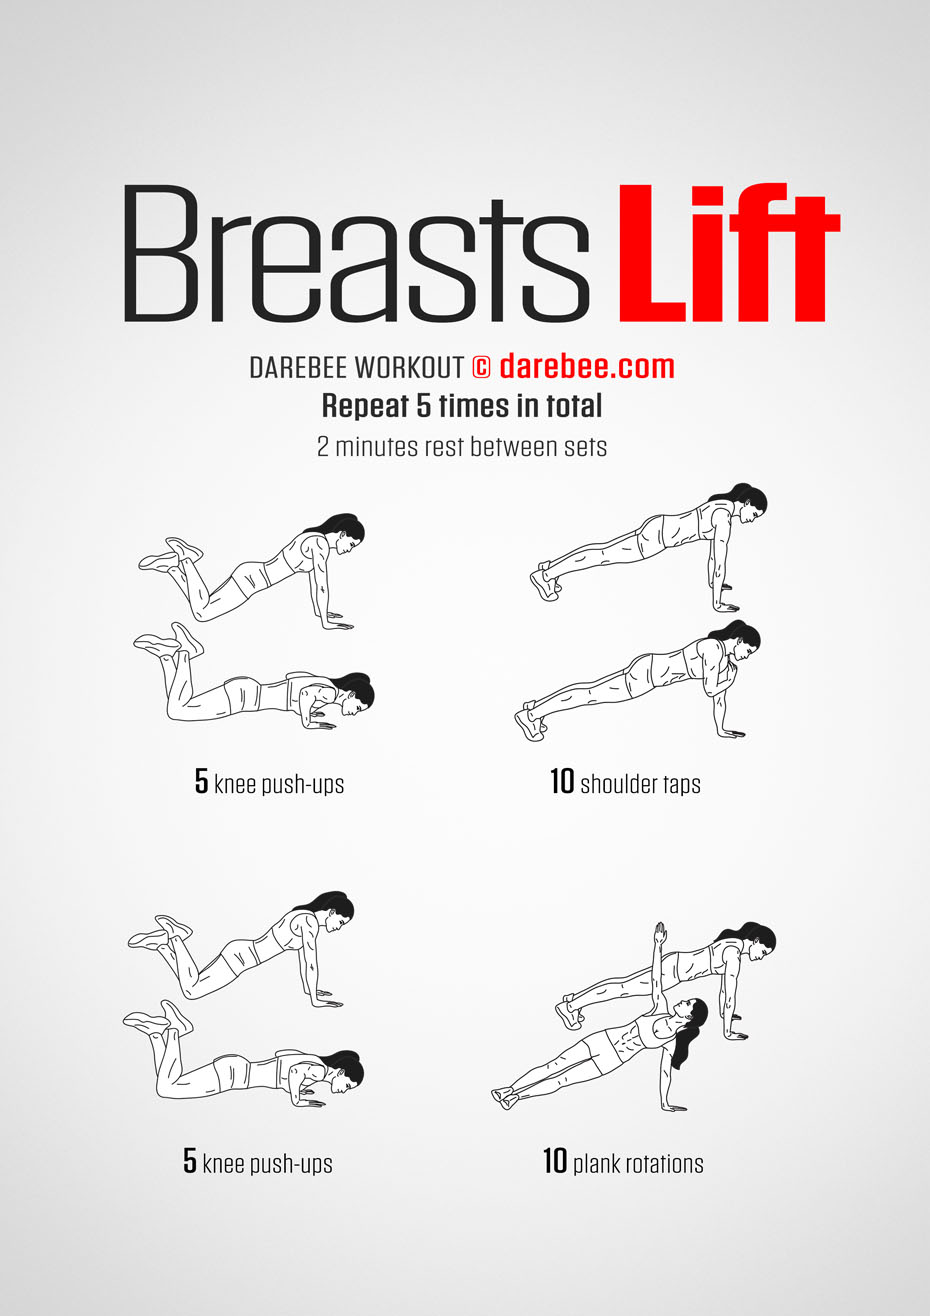 https://darebee.com/images/workouts/breasts-lift-workout.jpg